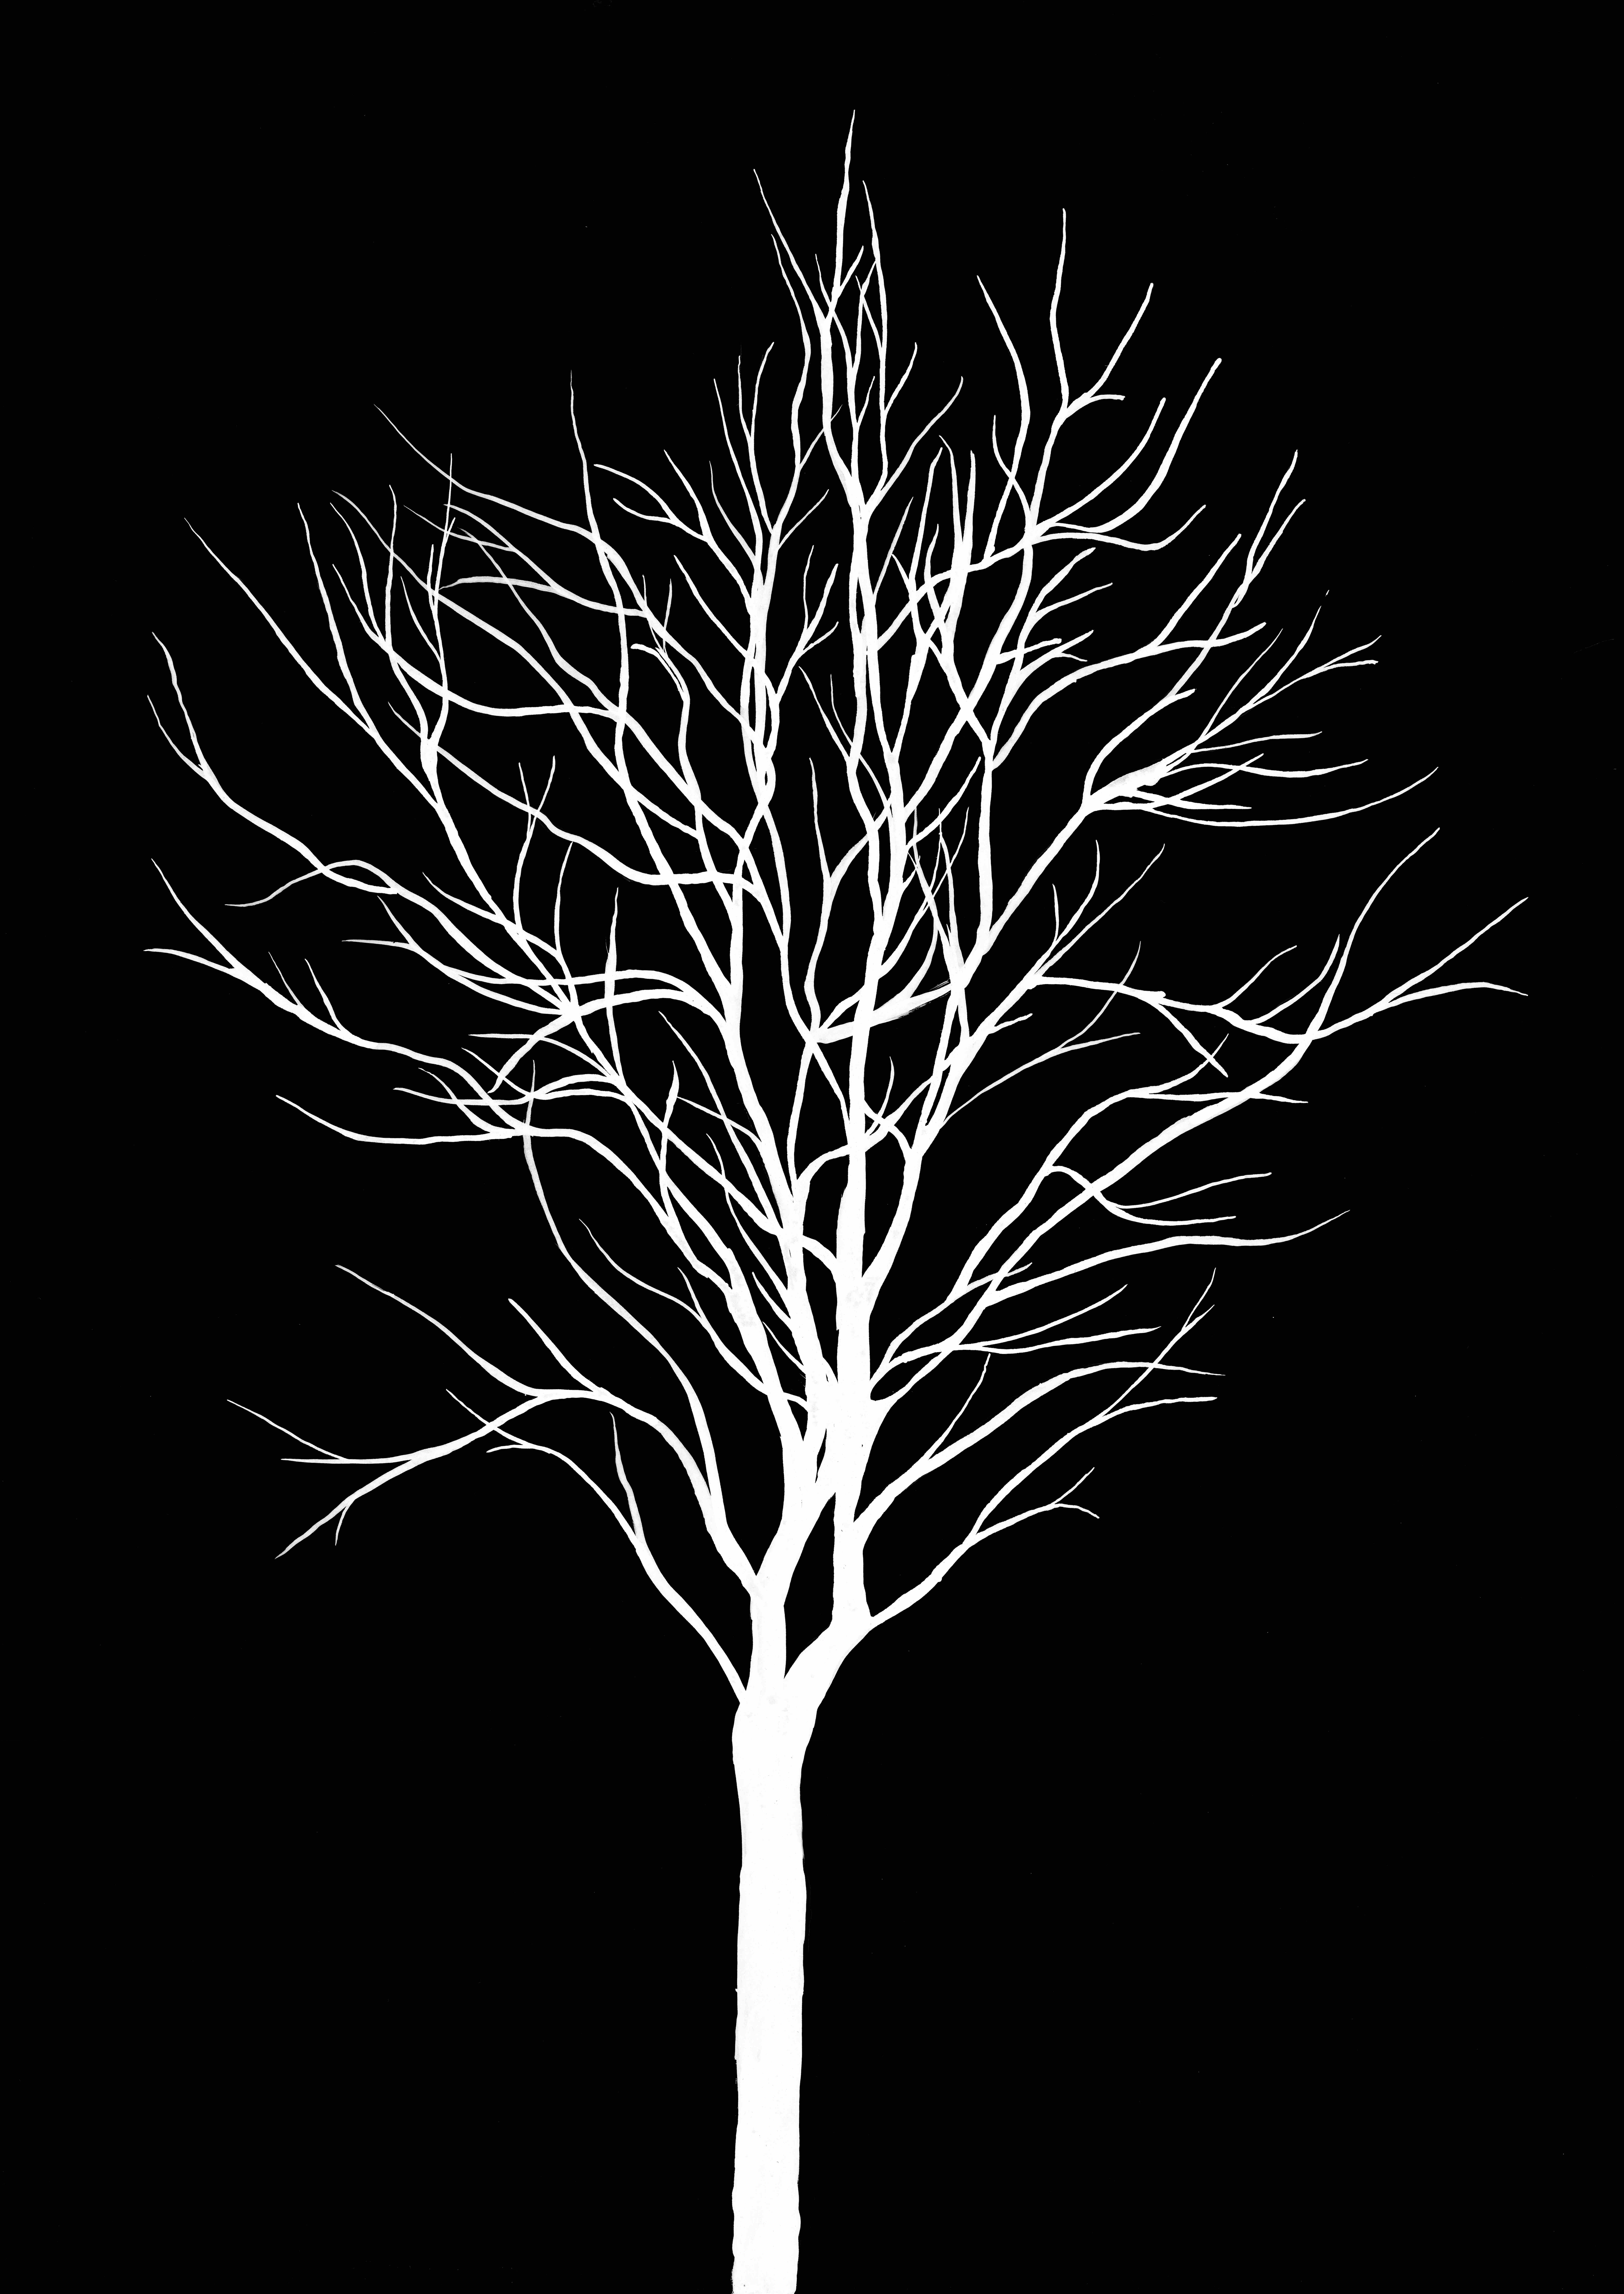 Birch Tree 1 Inverted | Ink Drawing by Debbie New